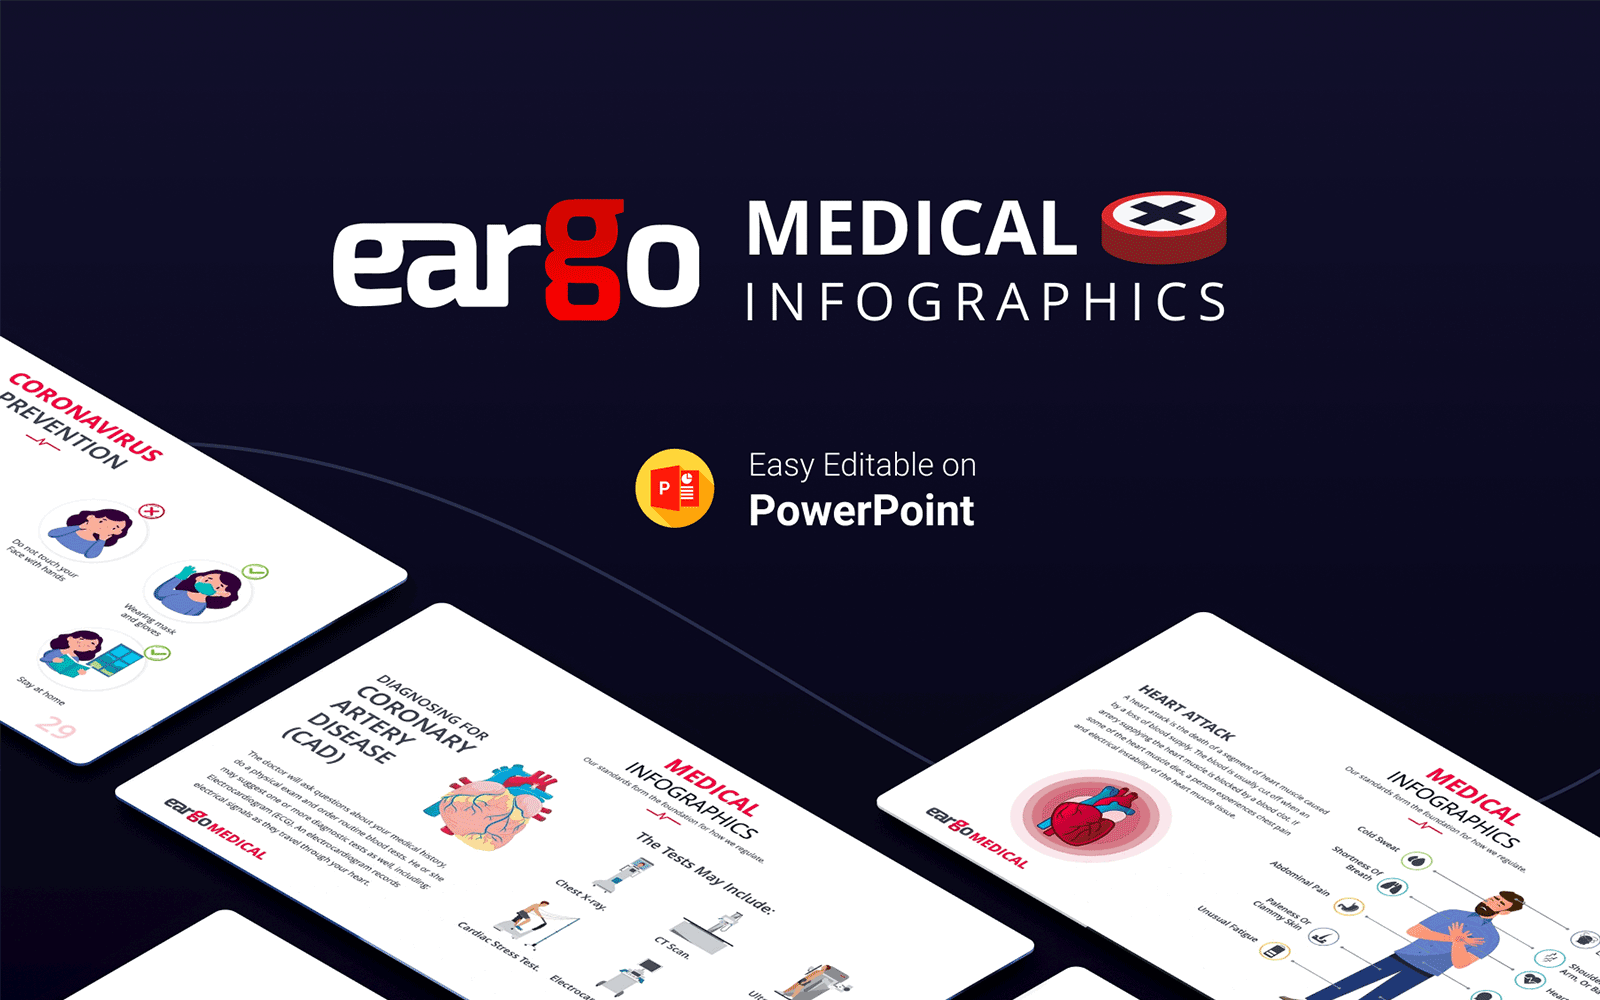 Eargo – Medical Infographic PowerPoint Presentation